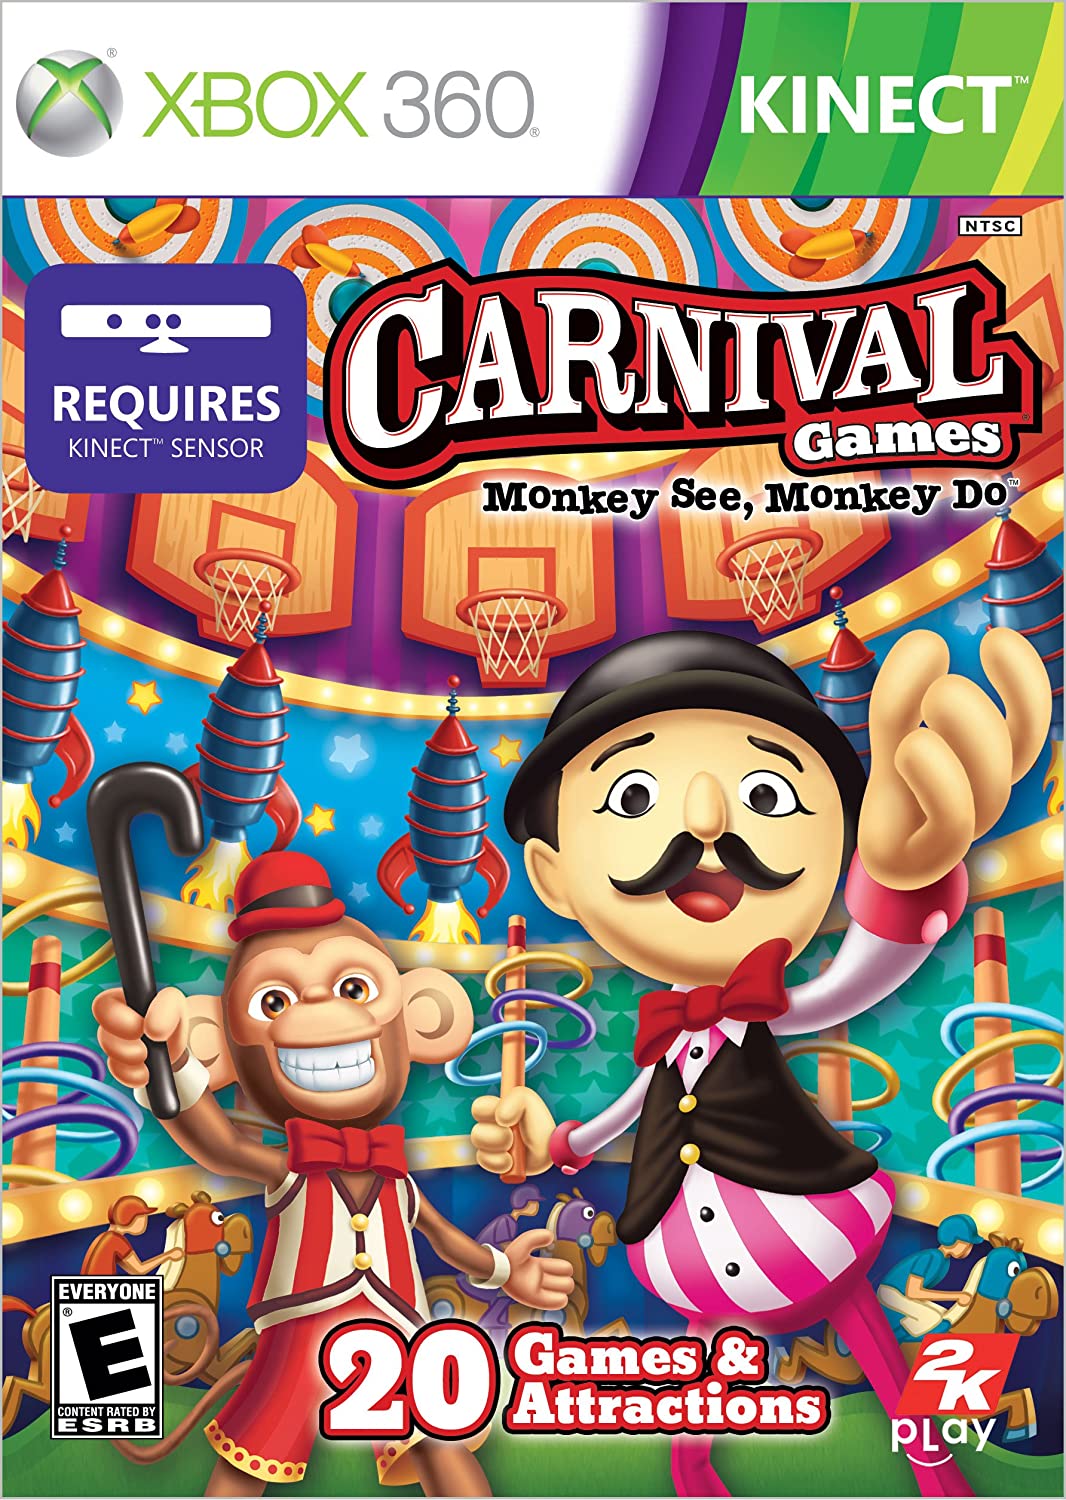 Carnival Games: Monkey See, Monkey Do player count stats